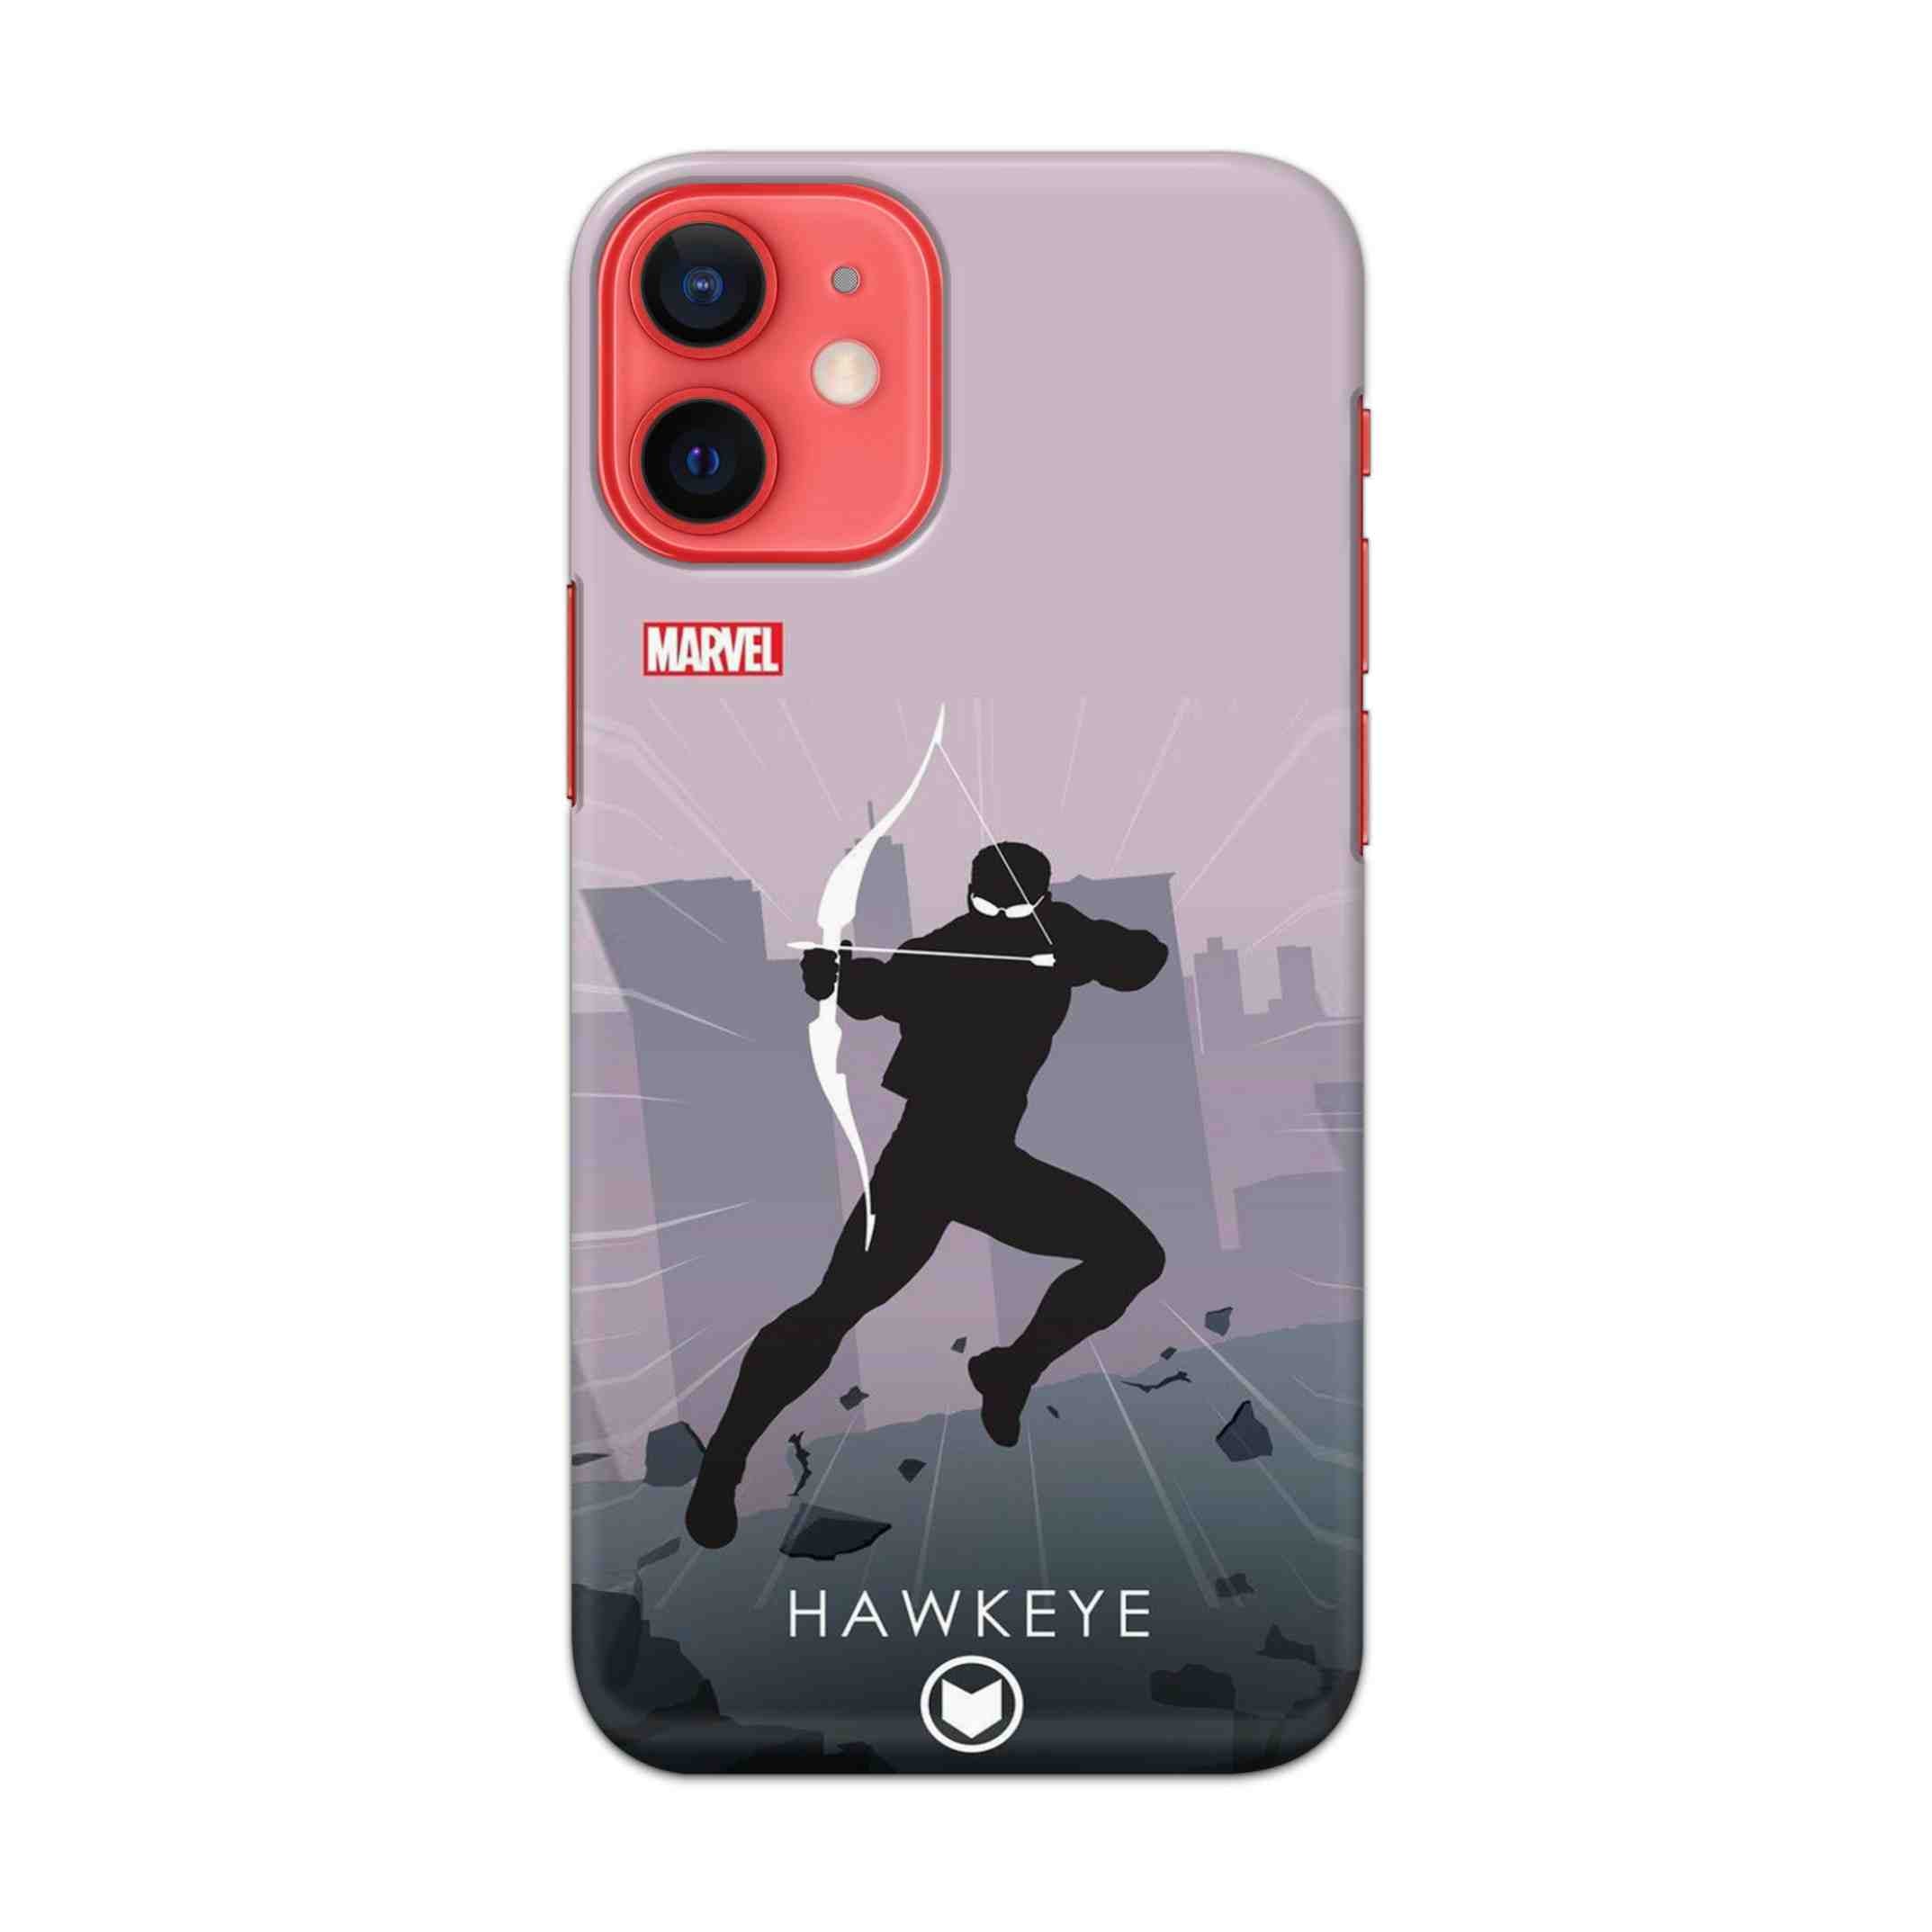 Buy Hawkeye Hard Back Mobile Phone Case/Cover For Apple iPhone 12 mini Online